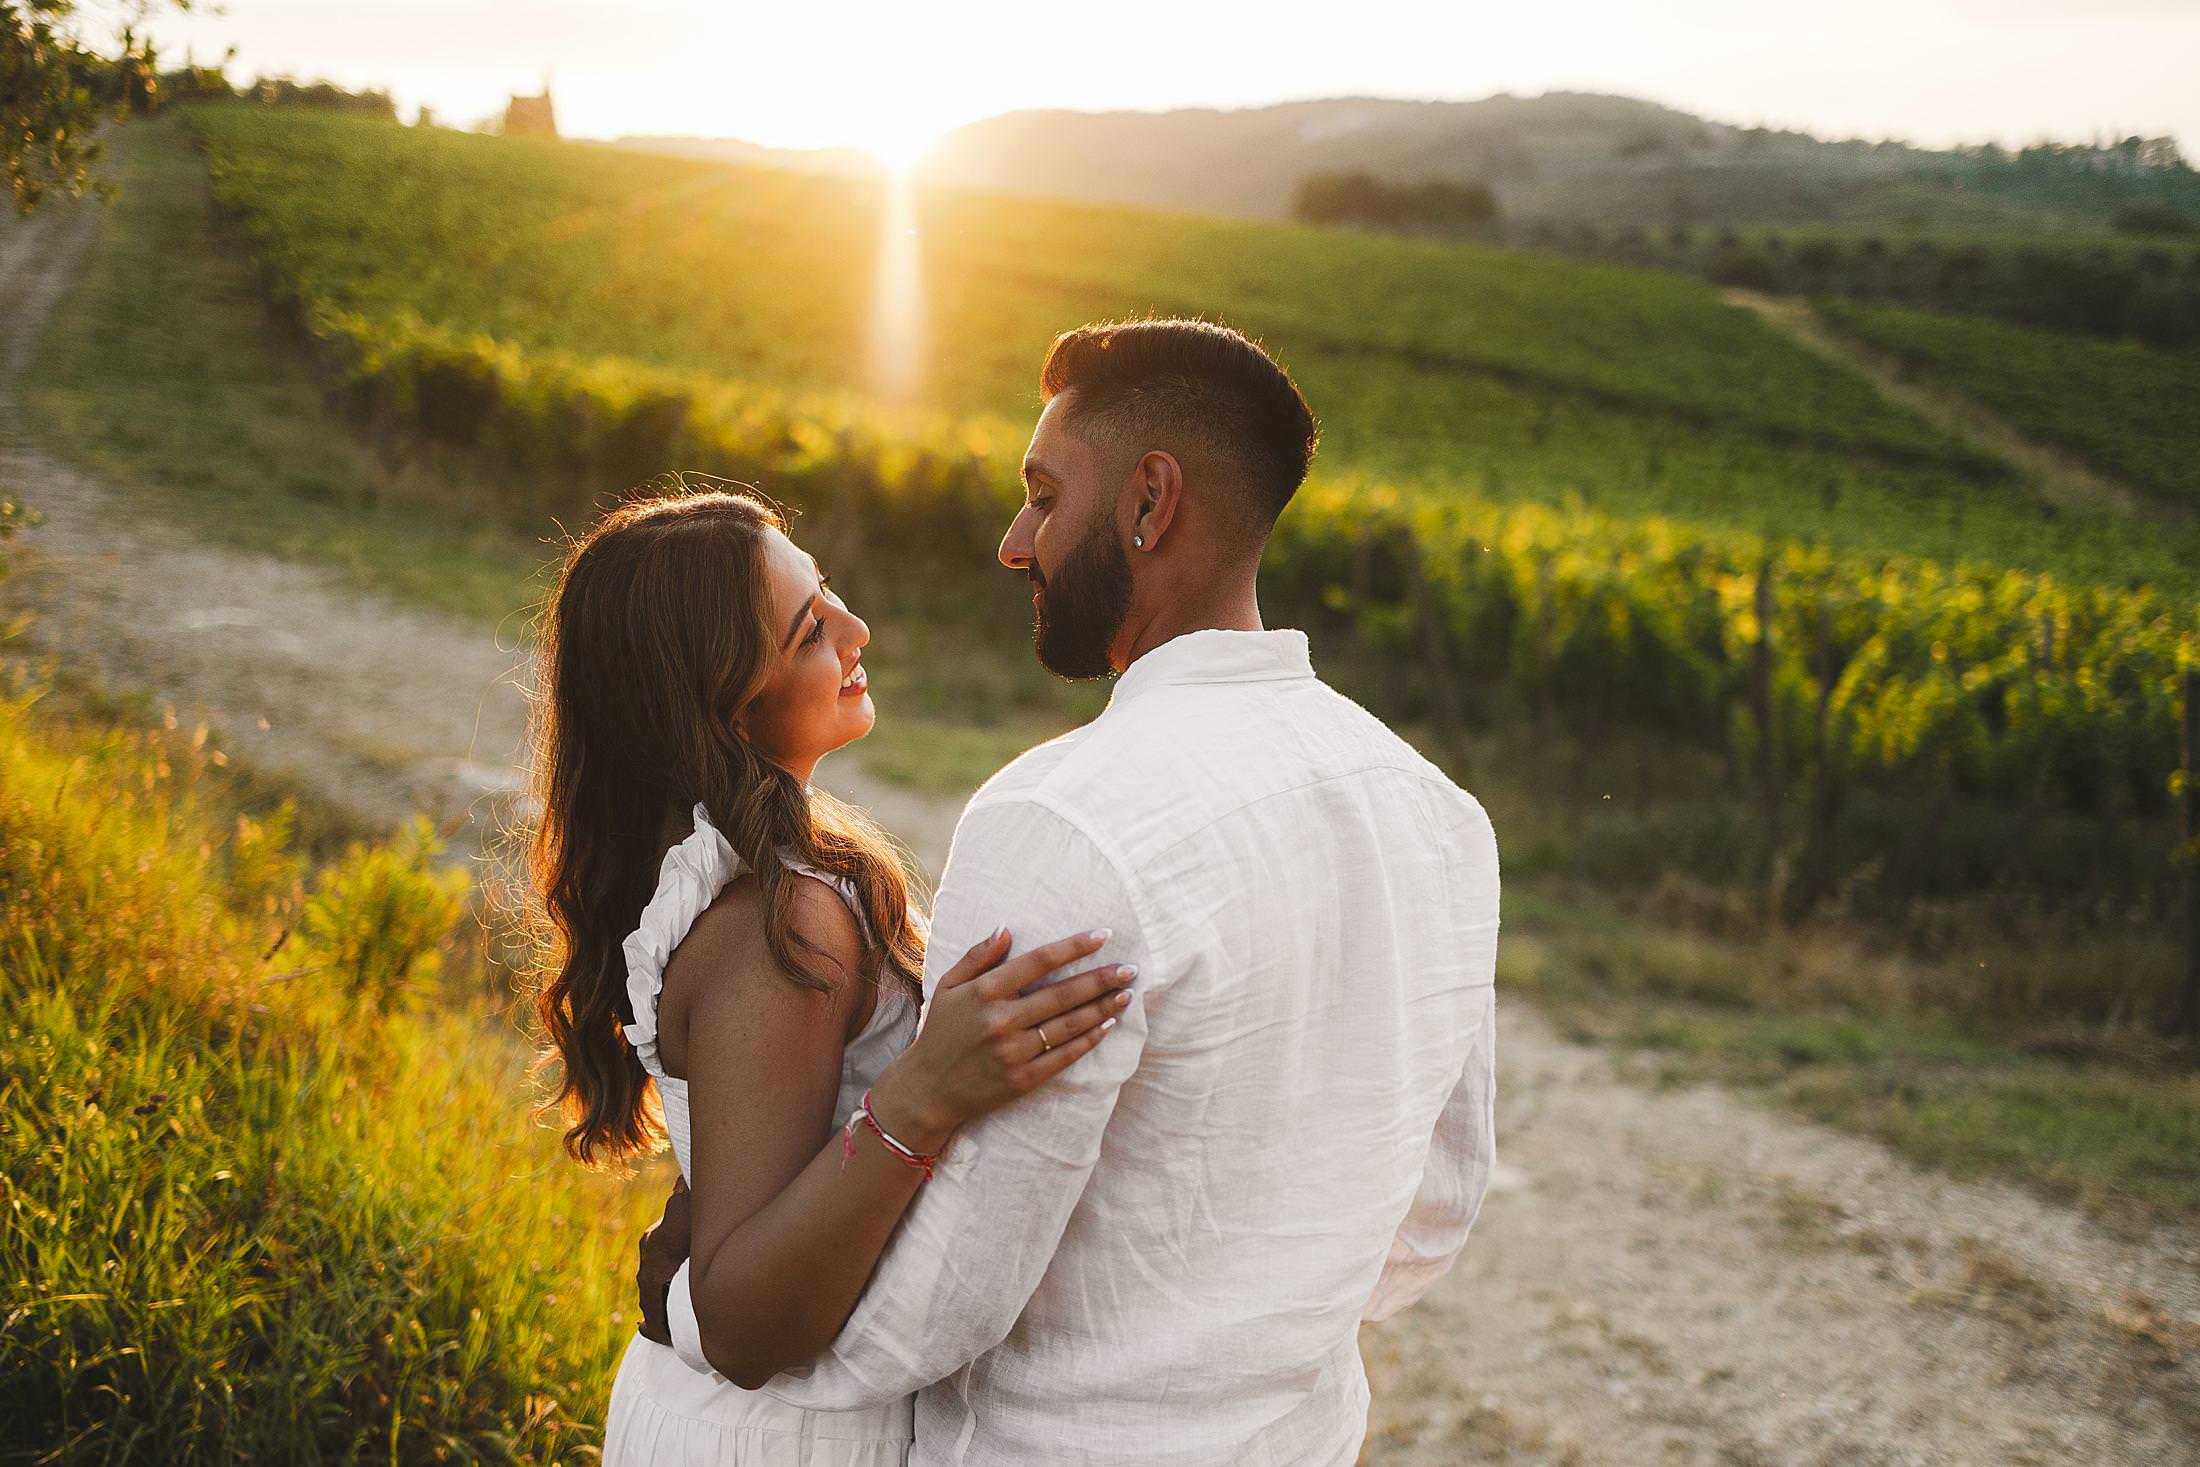 Gorgeous engagement photo session in golden hour Chianti countryside with vineyard as background